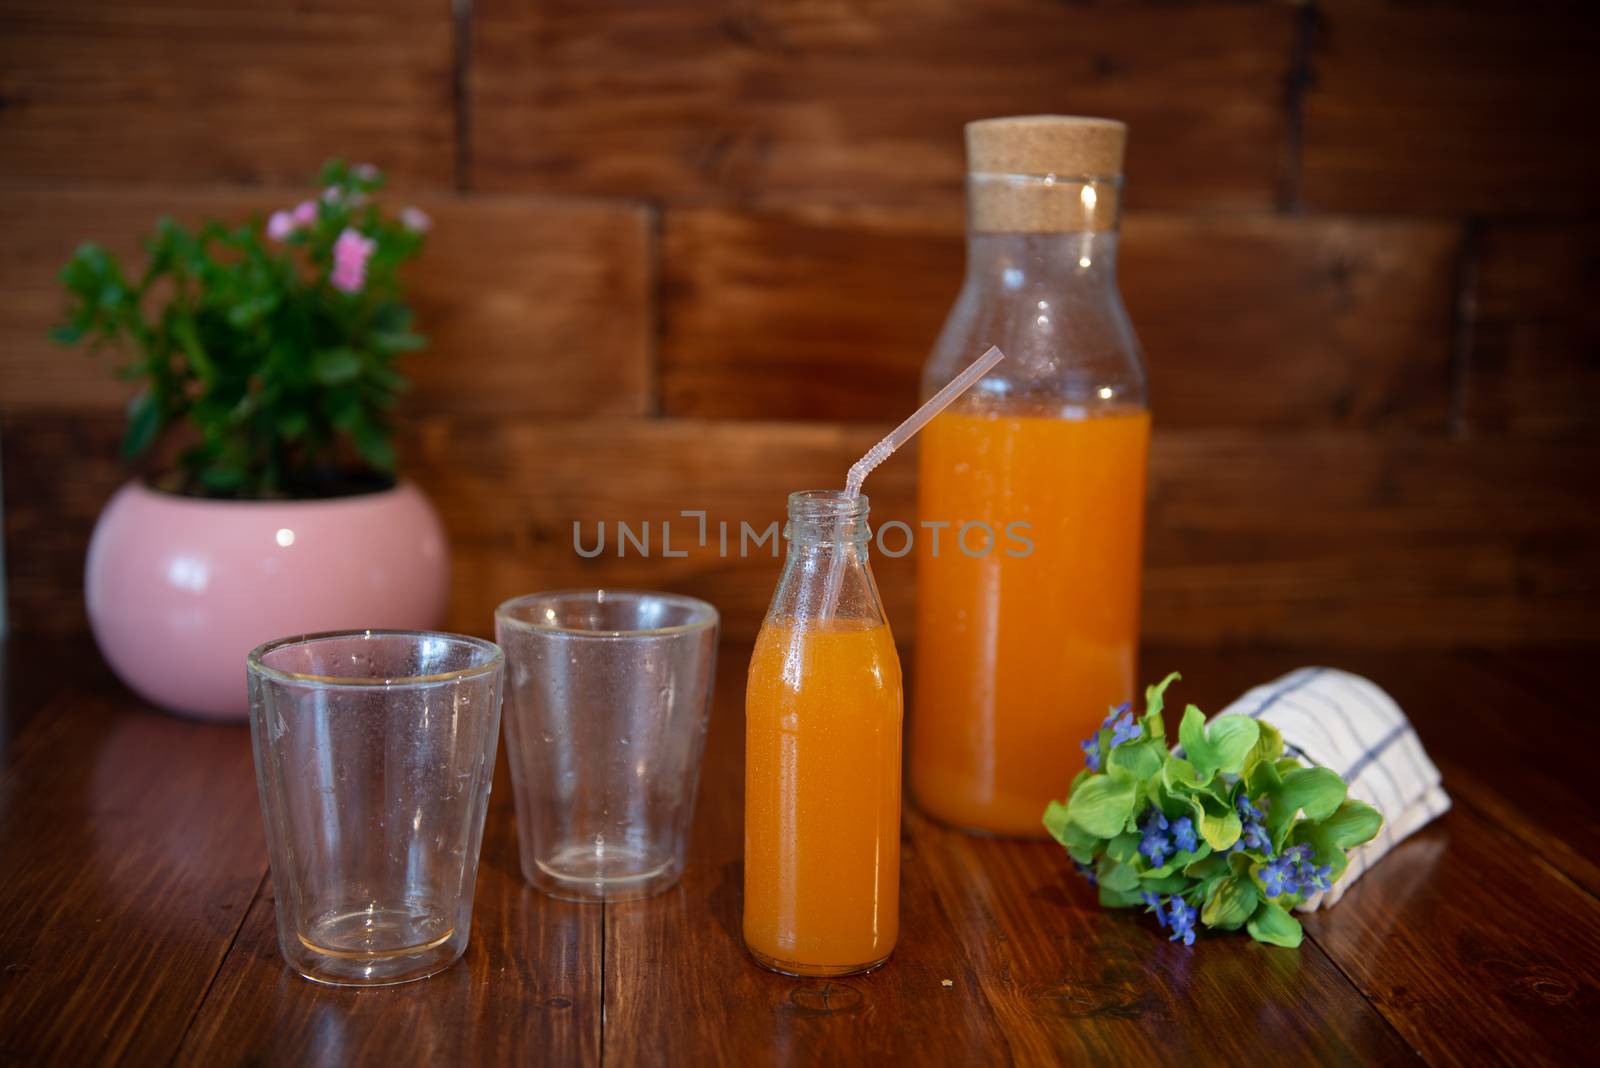 Fresh juice in bottle on wooden table with flowers and two empty glasses